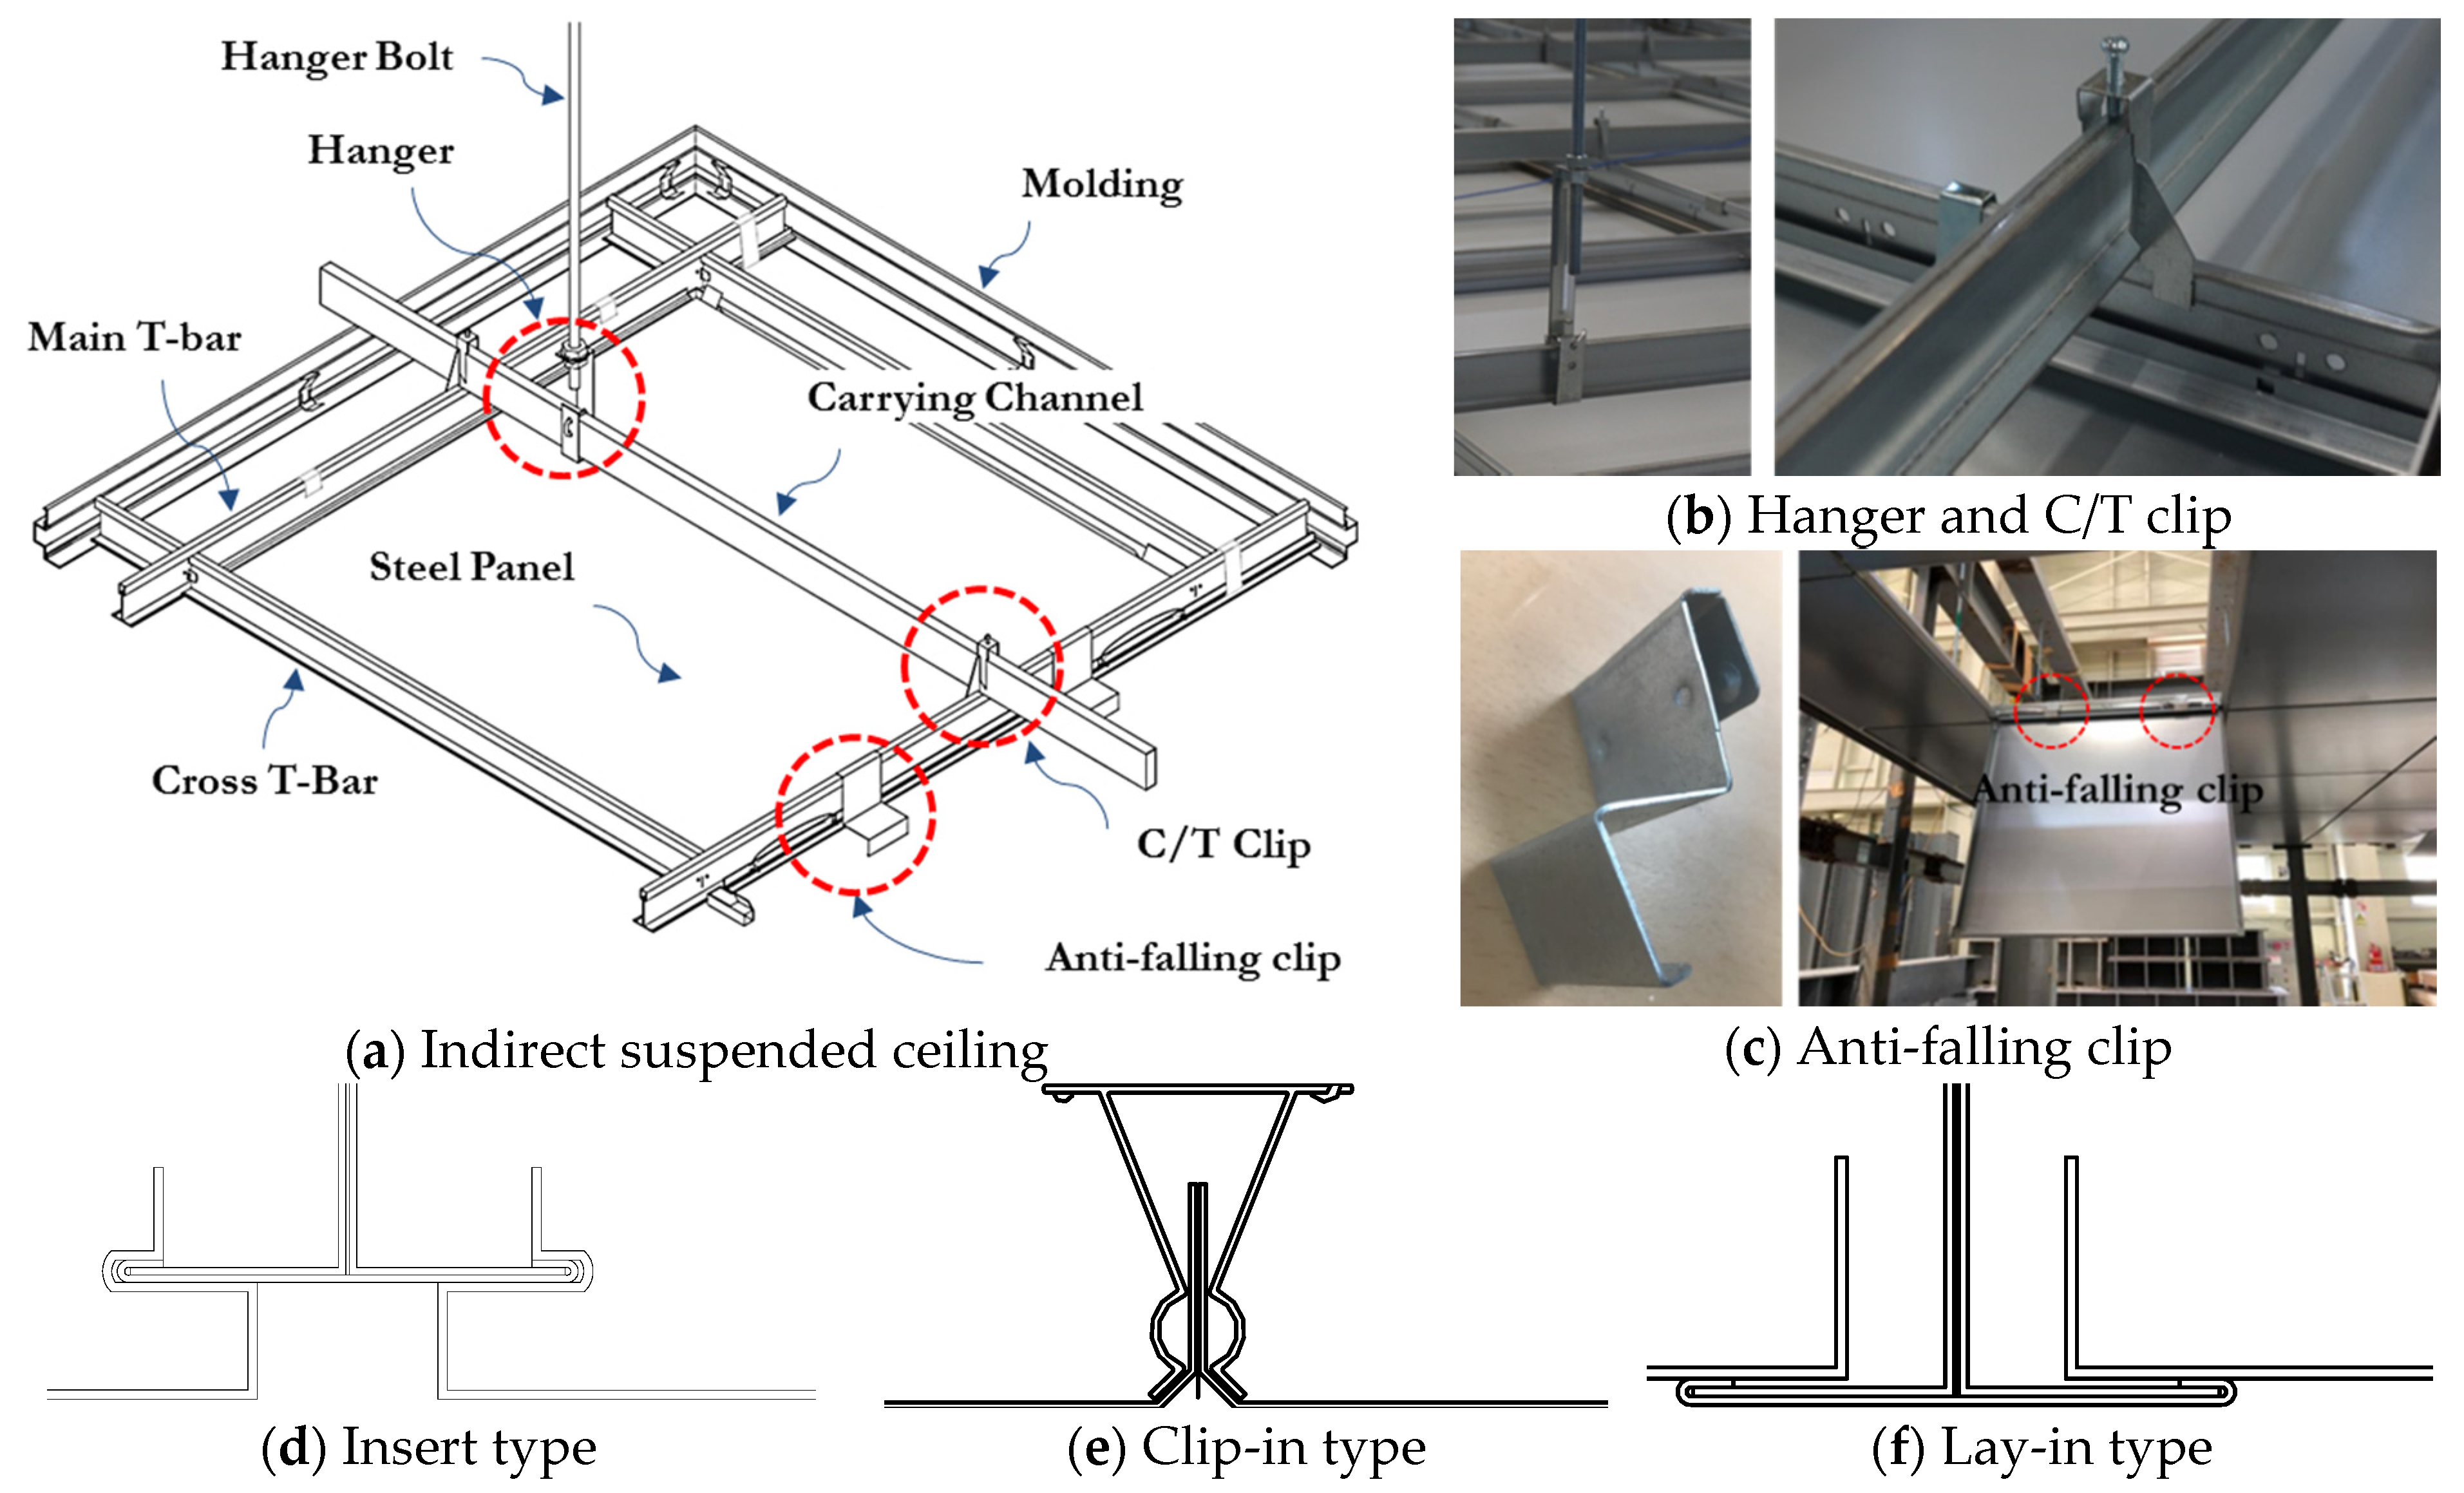 Applied Sciences Free Full Text Performance Evaluation Of Rigid Braced Indirect Suspended Ceiling With Steel Panels Html